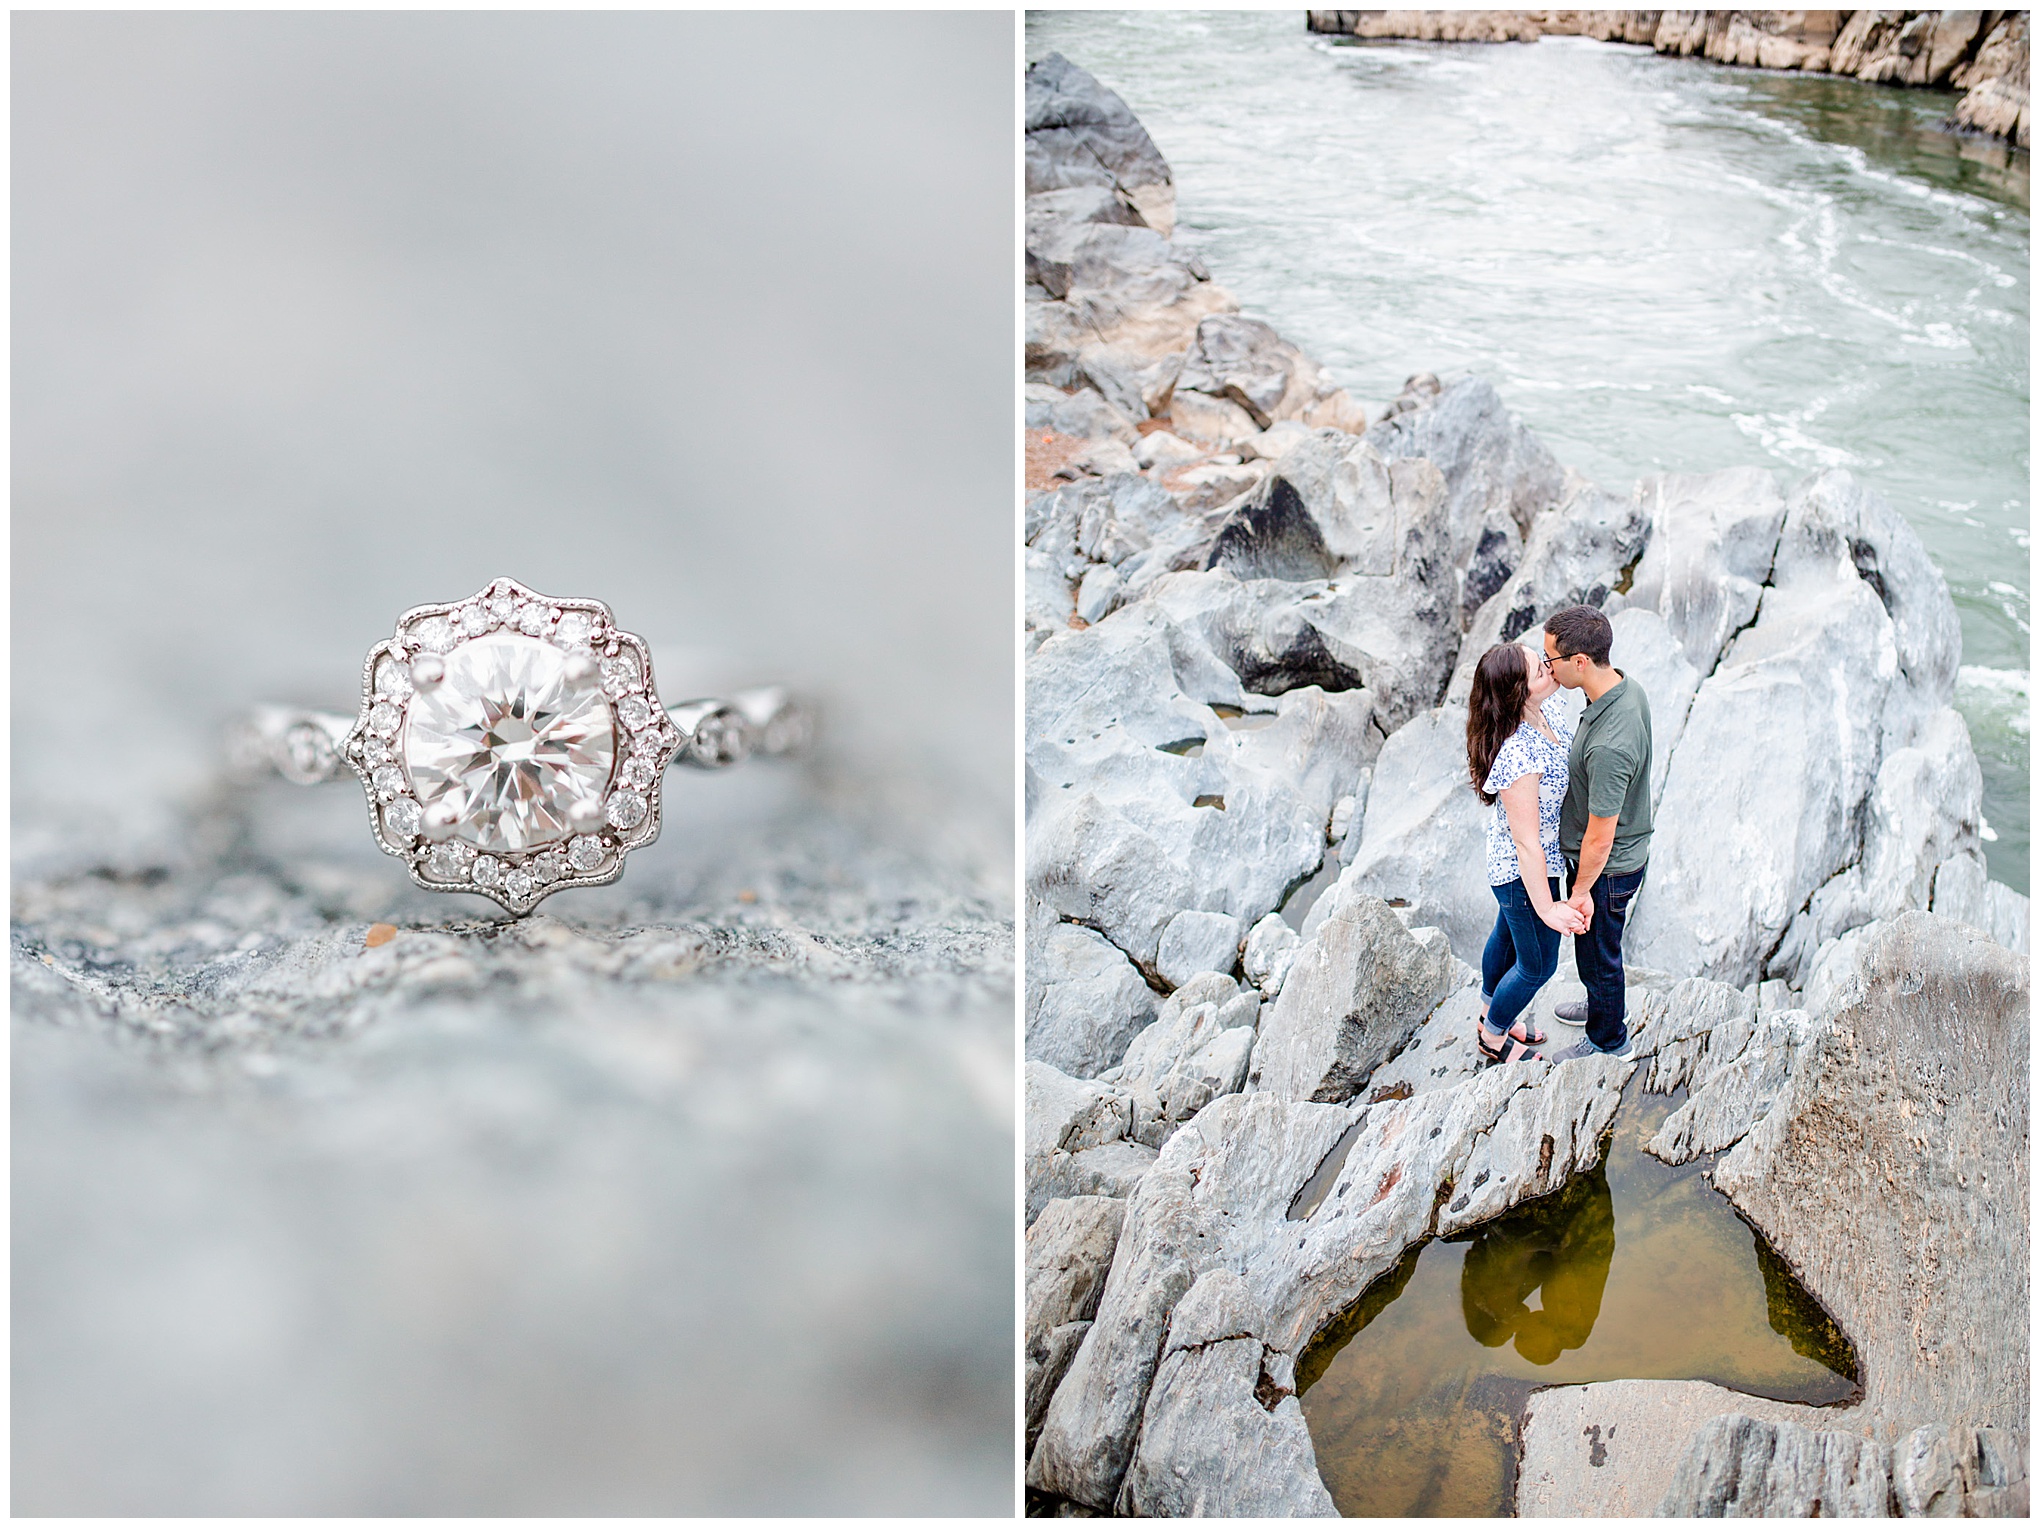 Great Falls Park engagement photos, Great Falls Park, Great Falls Virginia, national park, Great Falls, Great Falls engagement photos, Virginia engagement photos, Virginia engagement photographer, Rachel E.H. Photography, engaged couple, engagement session style, outdoorsy engagement photos, hiking engagement photos, couple standing on rocks